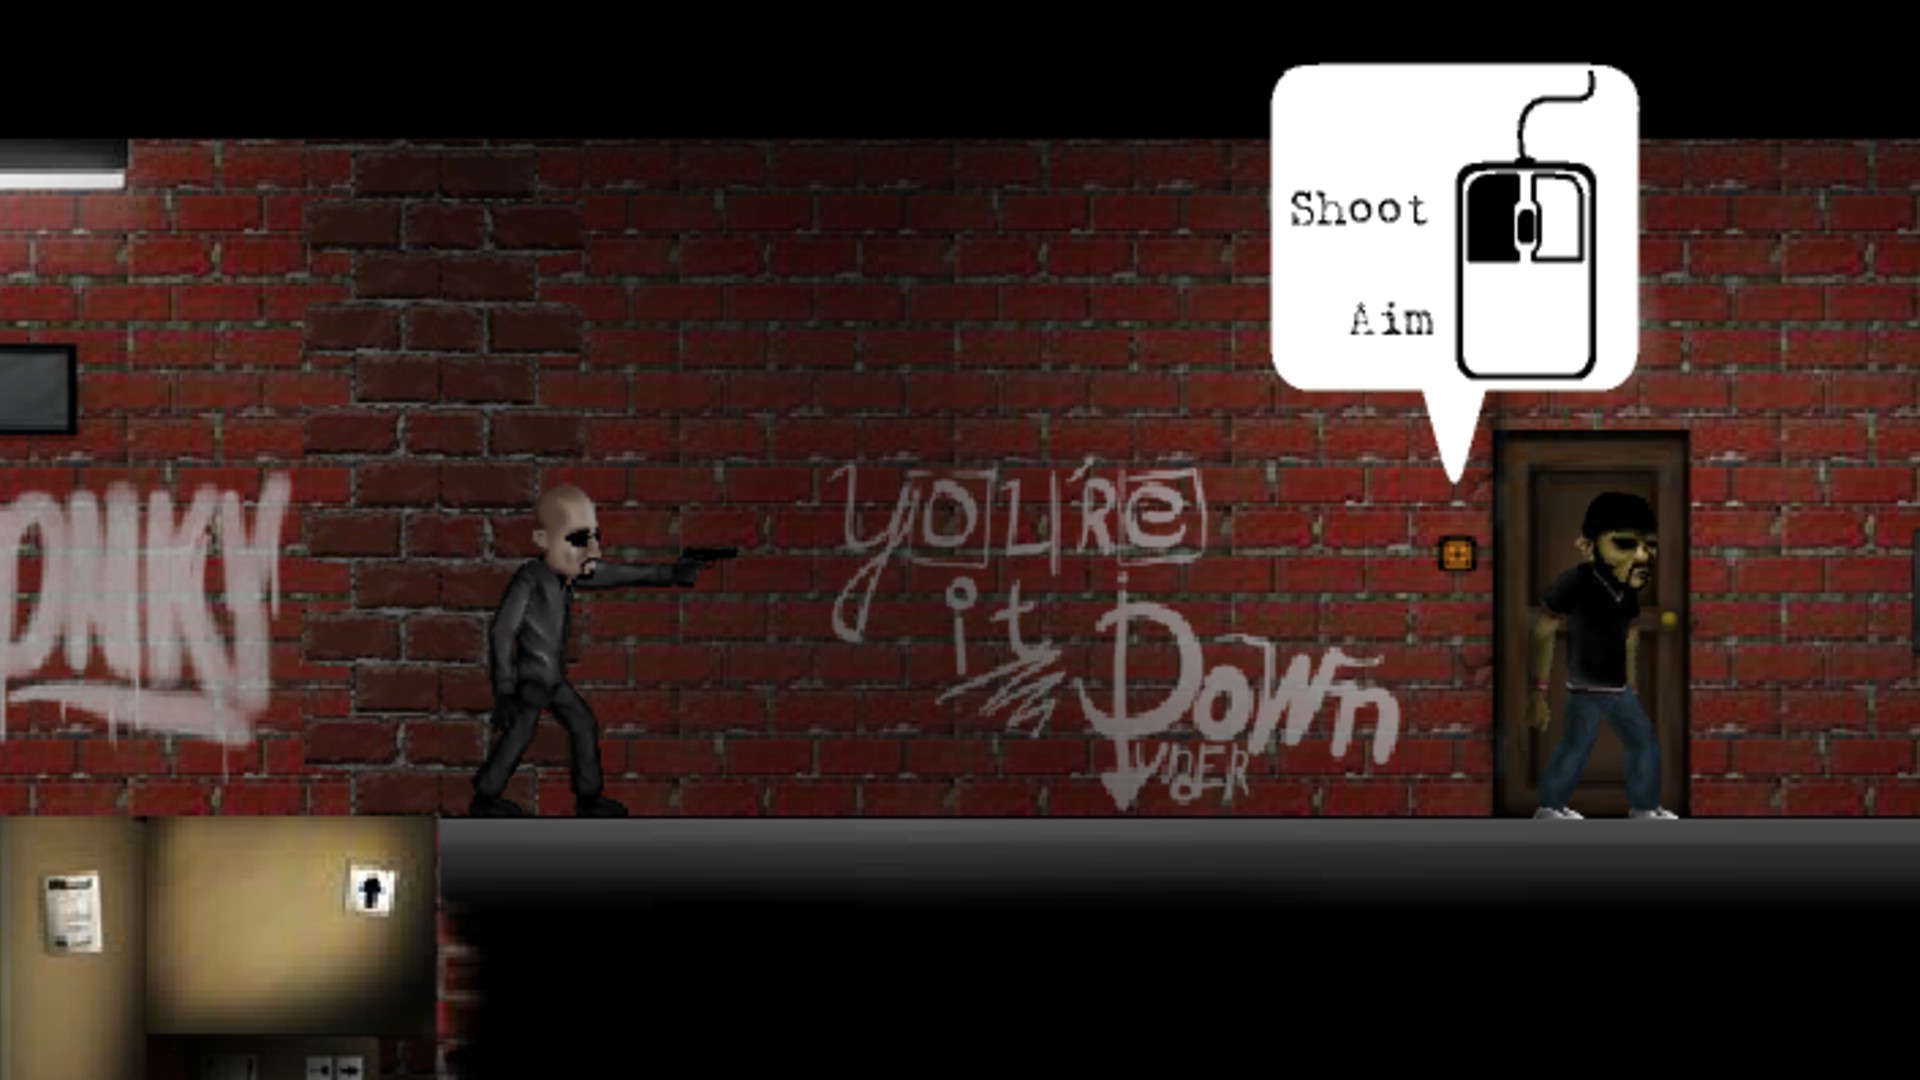 Online games: My Friend Pedro. Image shows a character getting ready to shoot someone on the streets.